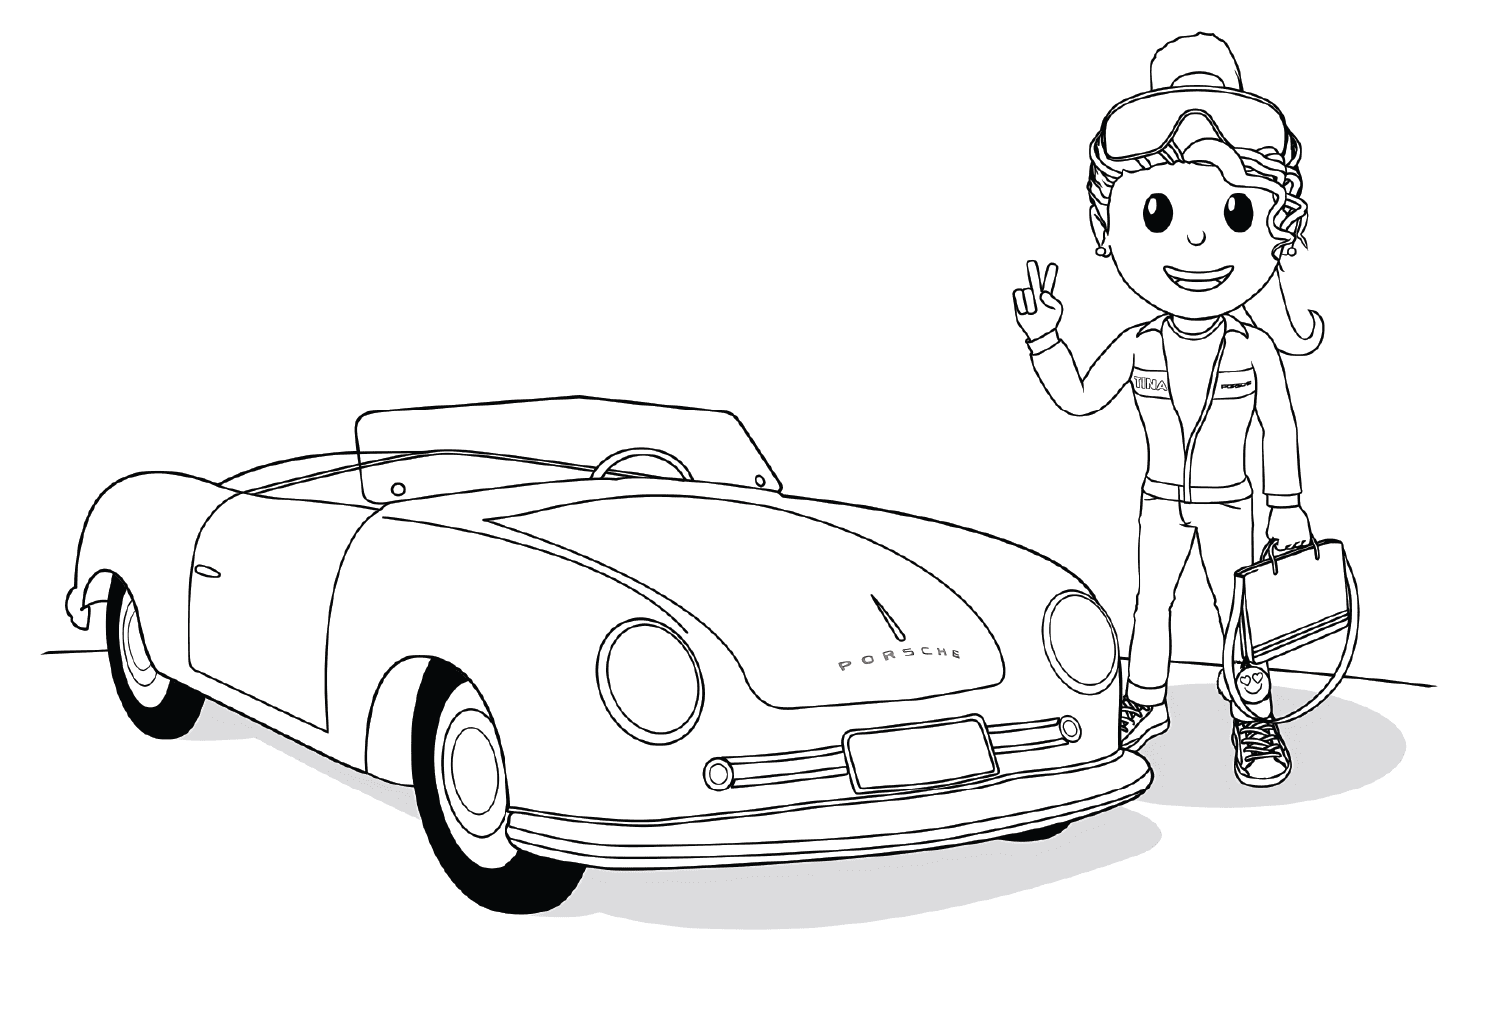 Porsche Coloring Page for Adults from Porsche